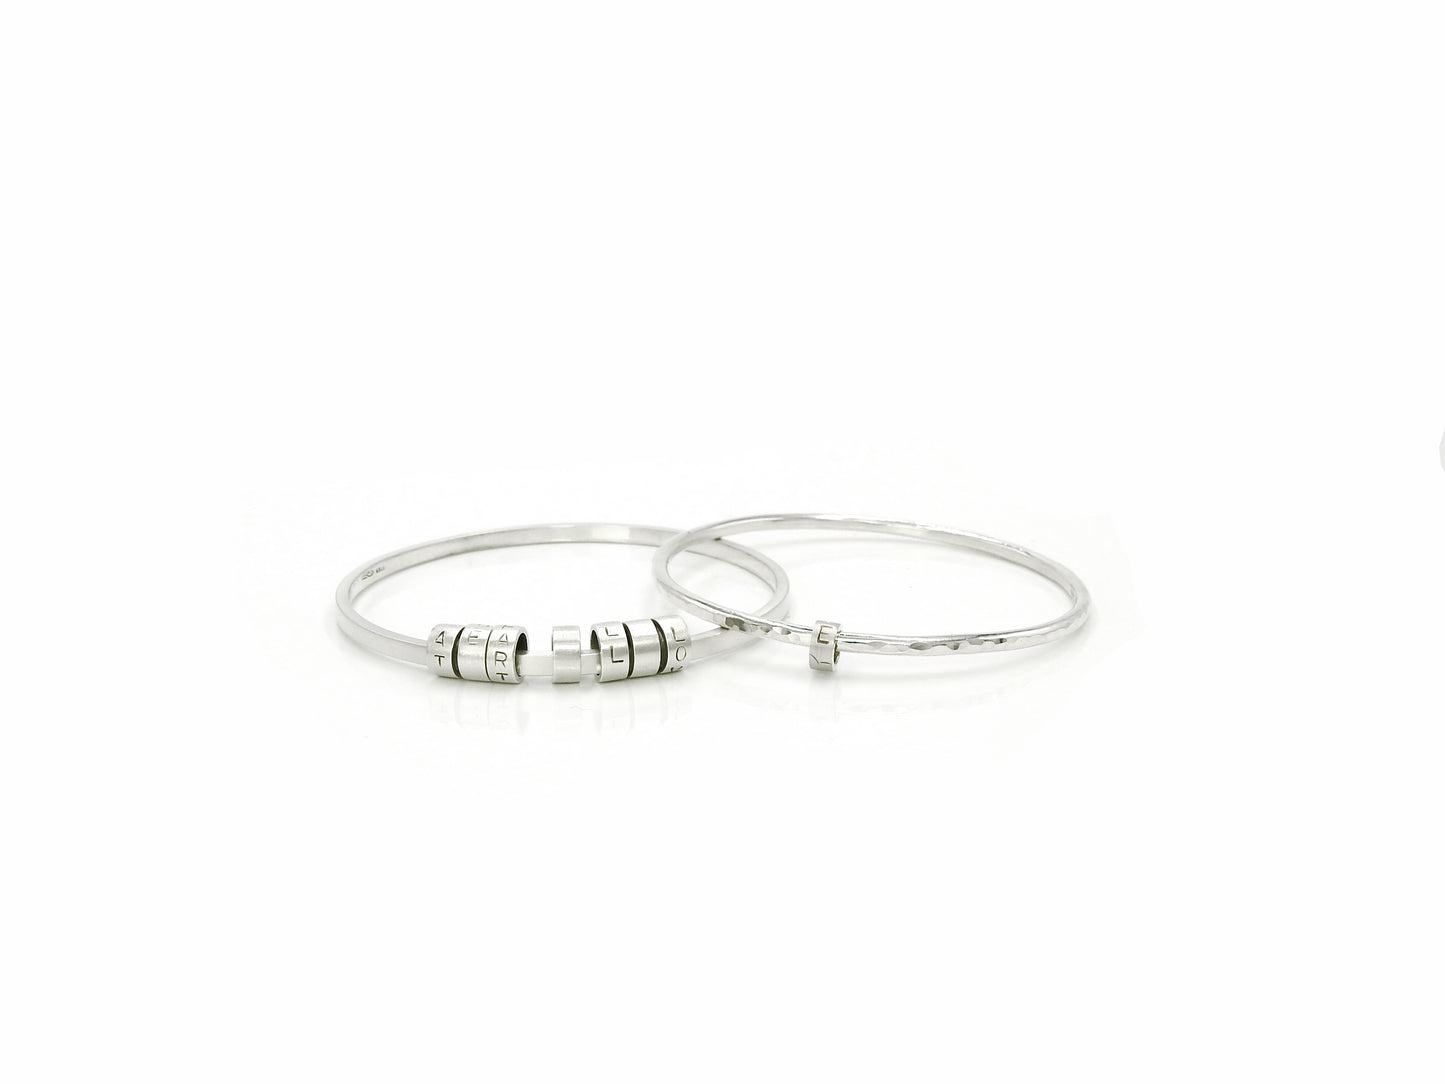 handmade bracelets made with 100% recycled silver and gold, by ZEALmetal, Nicole Horlor, Kingston , On Canada